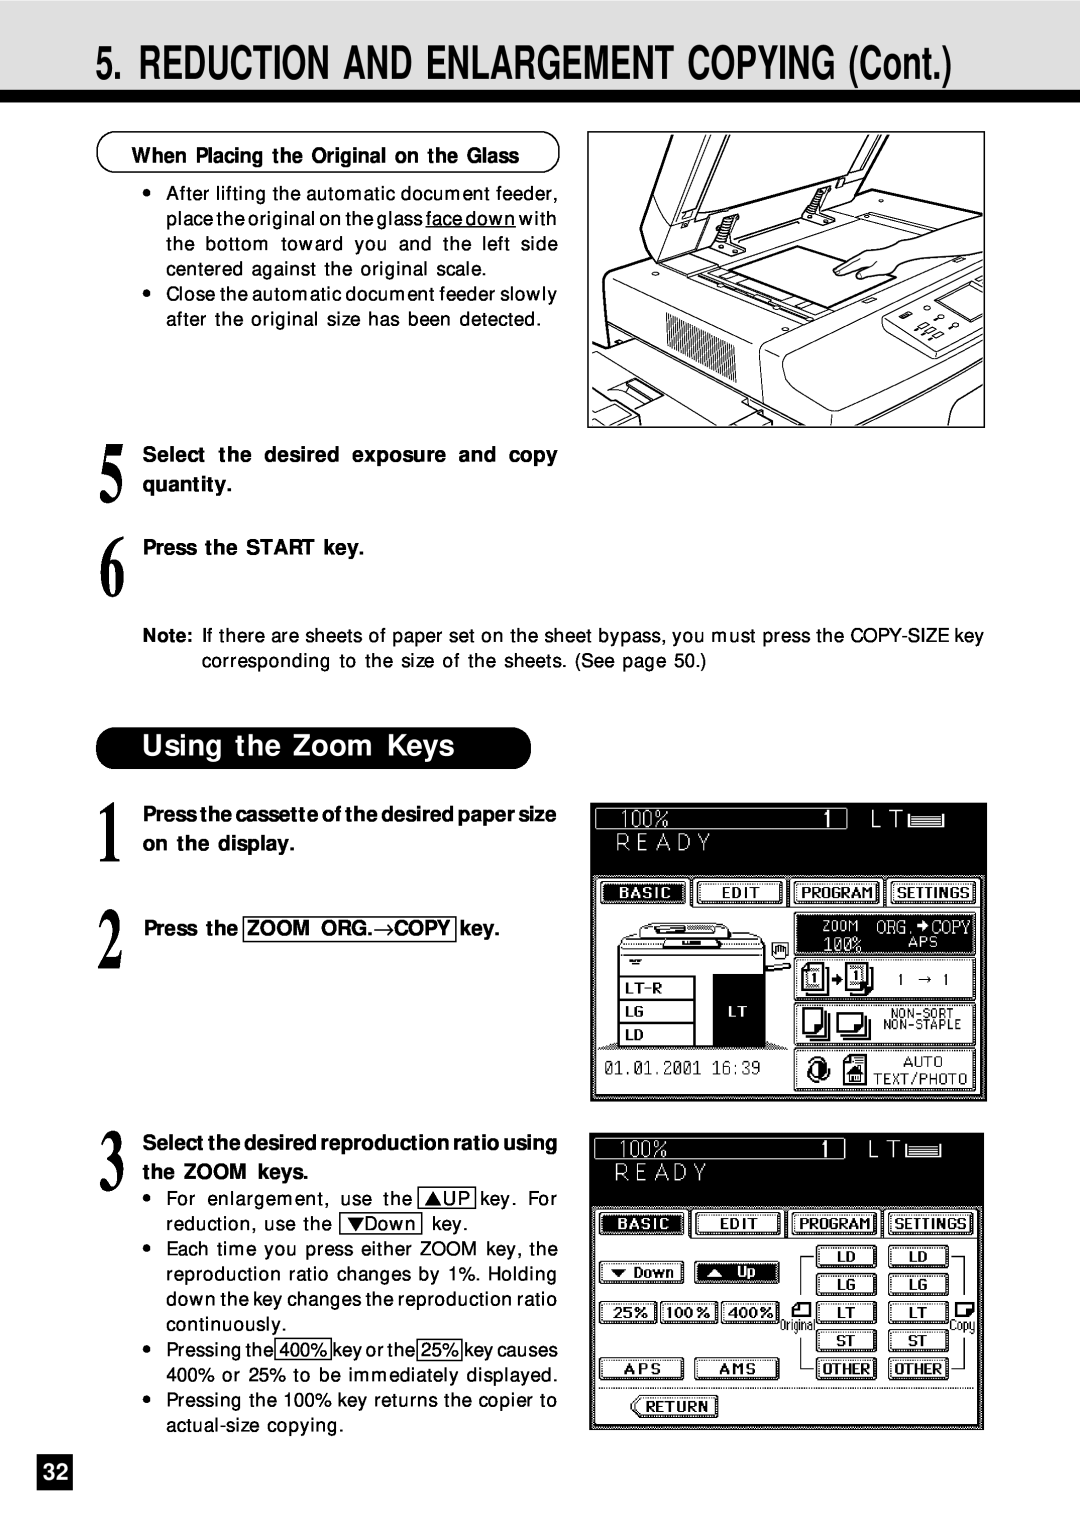 Sharp AR-650 operation manual Using the Zoom Keys, Select the desired exposure and copy quantity Press the START key 